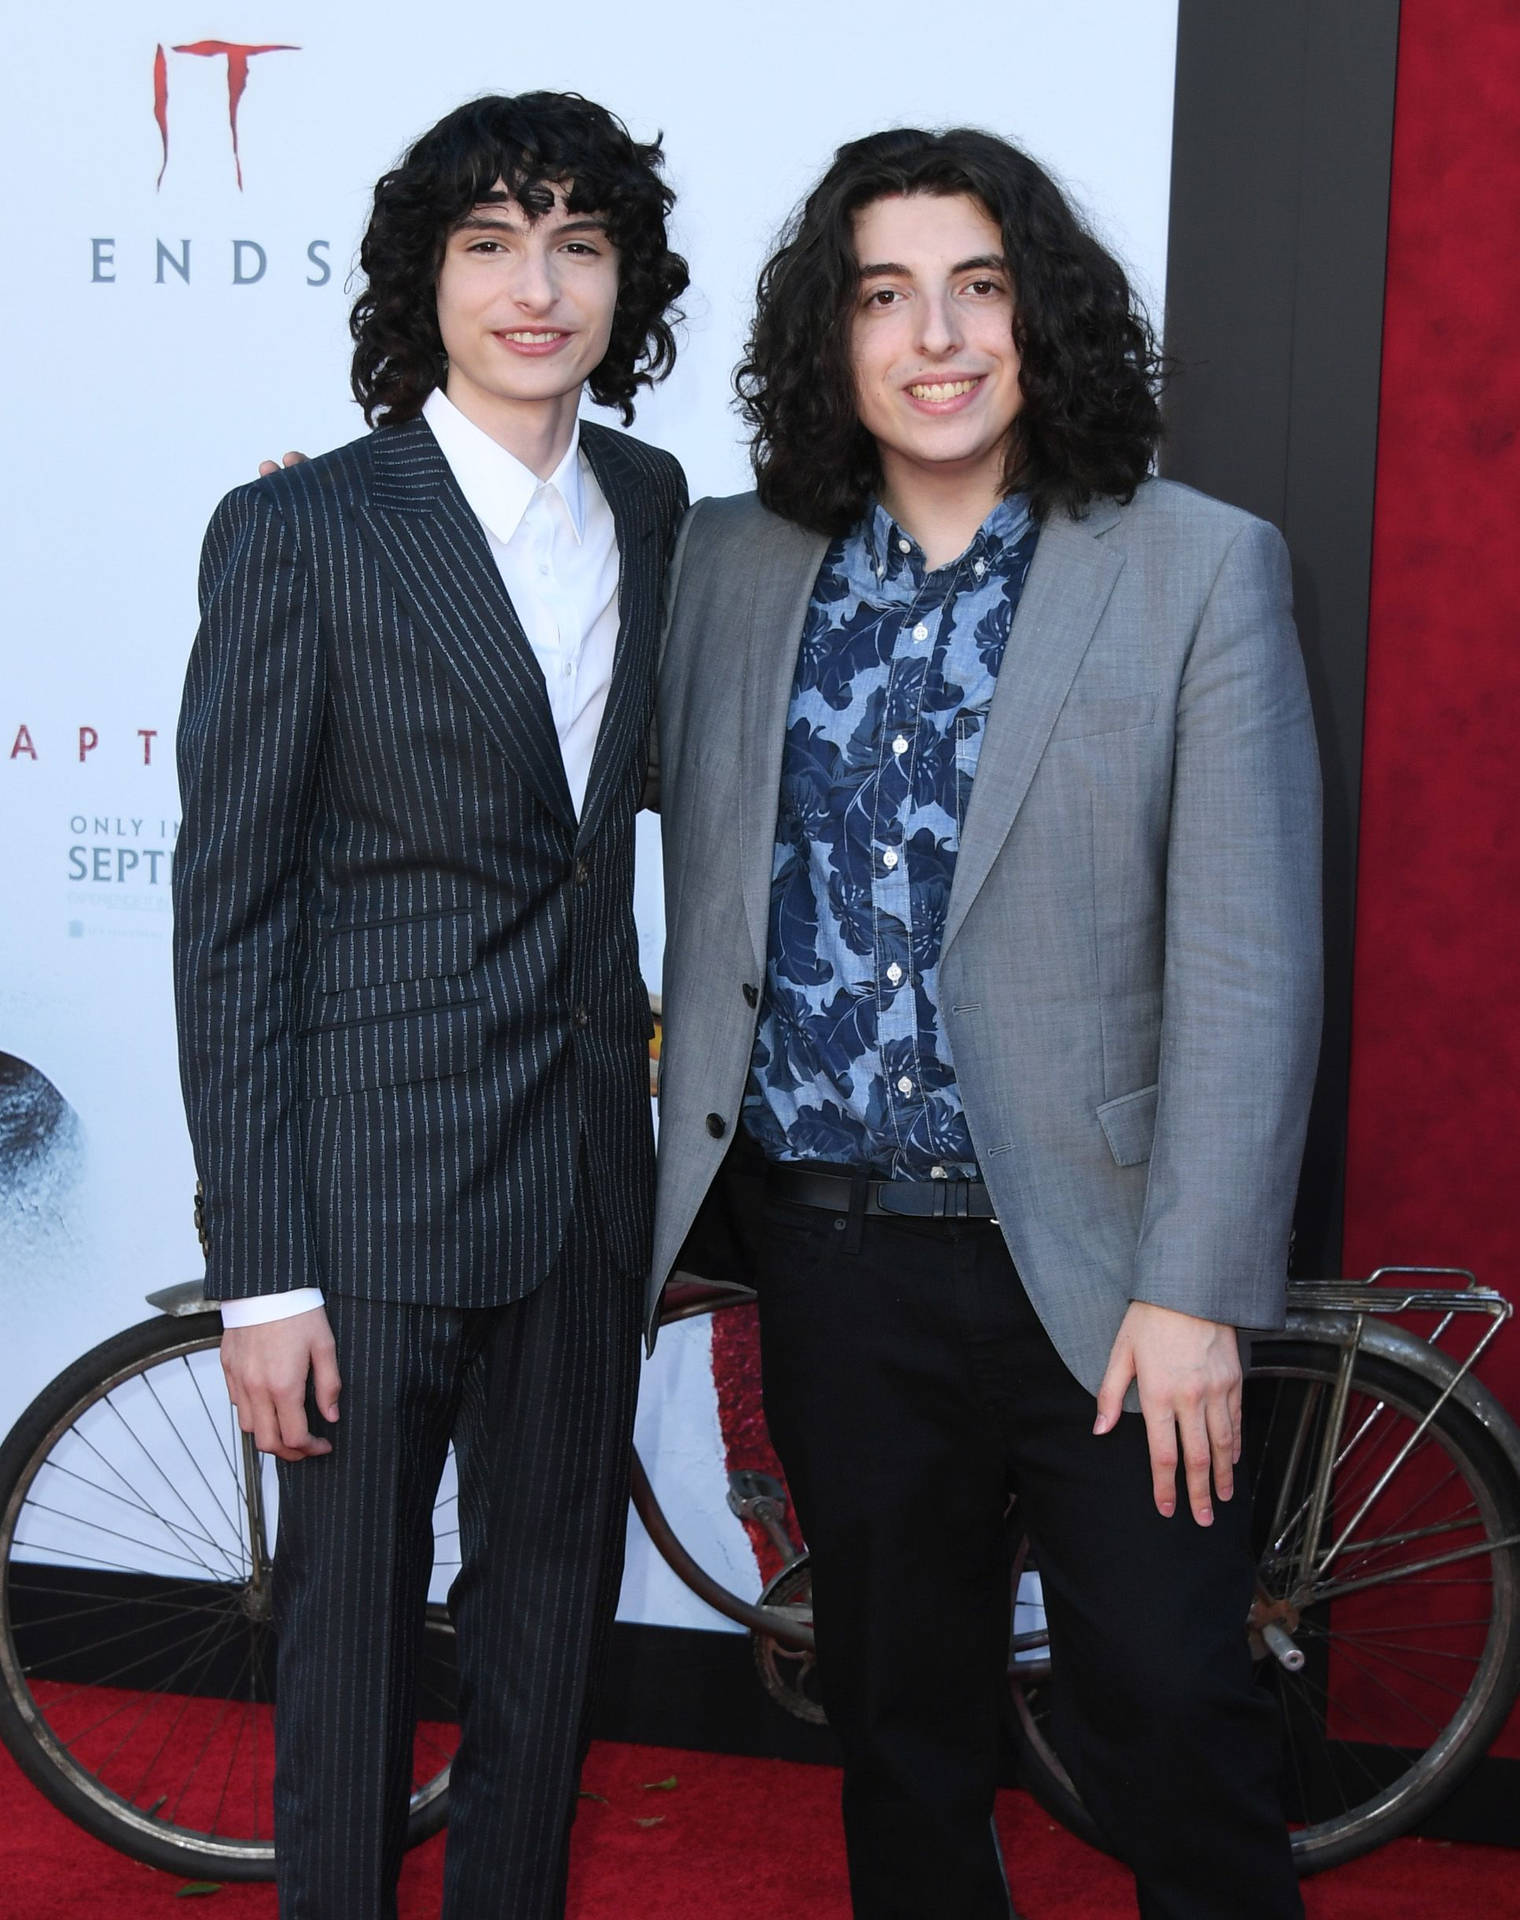 Finn Wolfhard And It Co-actor Background